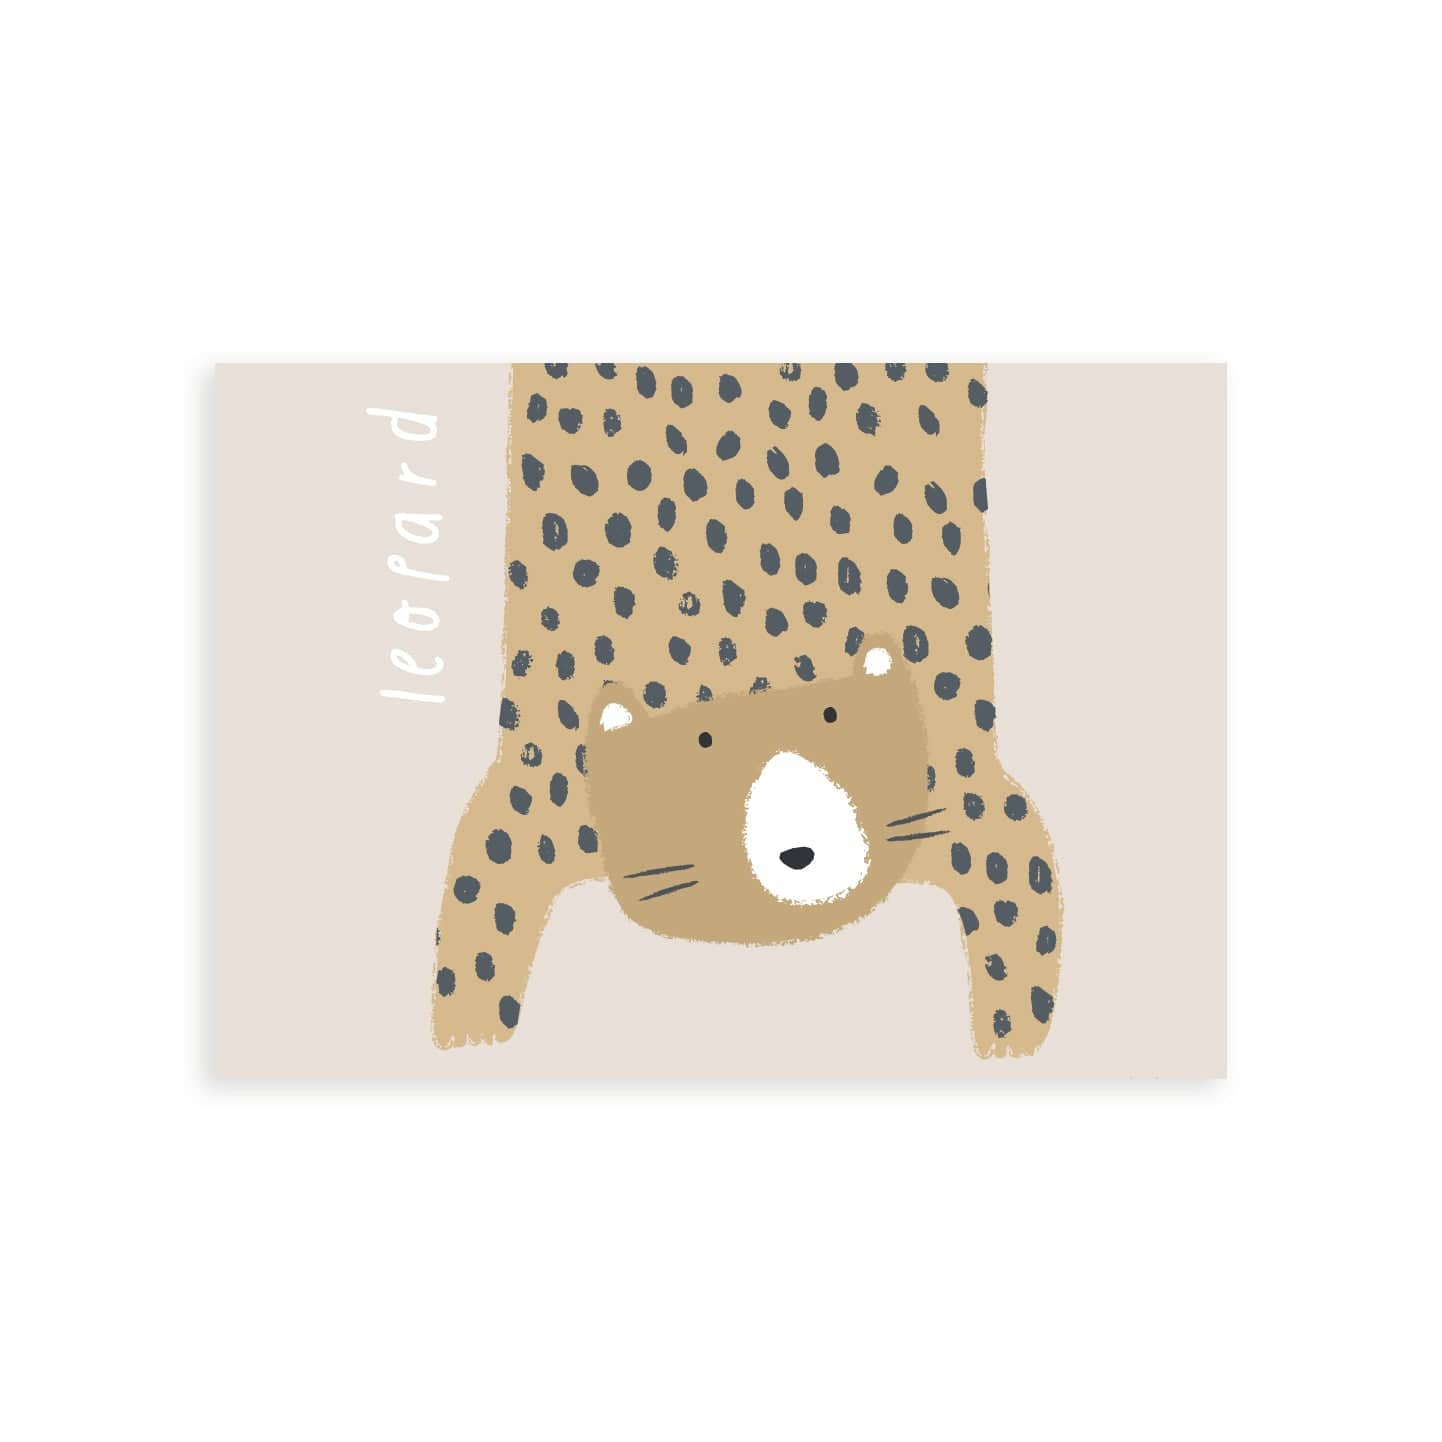 Our Leopard art print shows a hand-drawn leopard hanging down in to the picture, lifting it's head to look out at us on a beige background, with the word leopard written alongside it